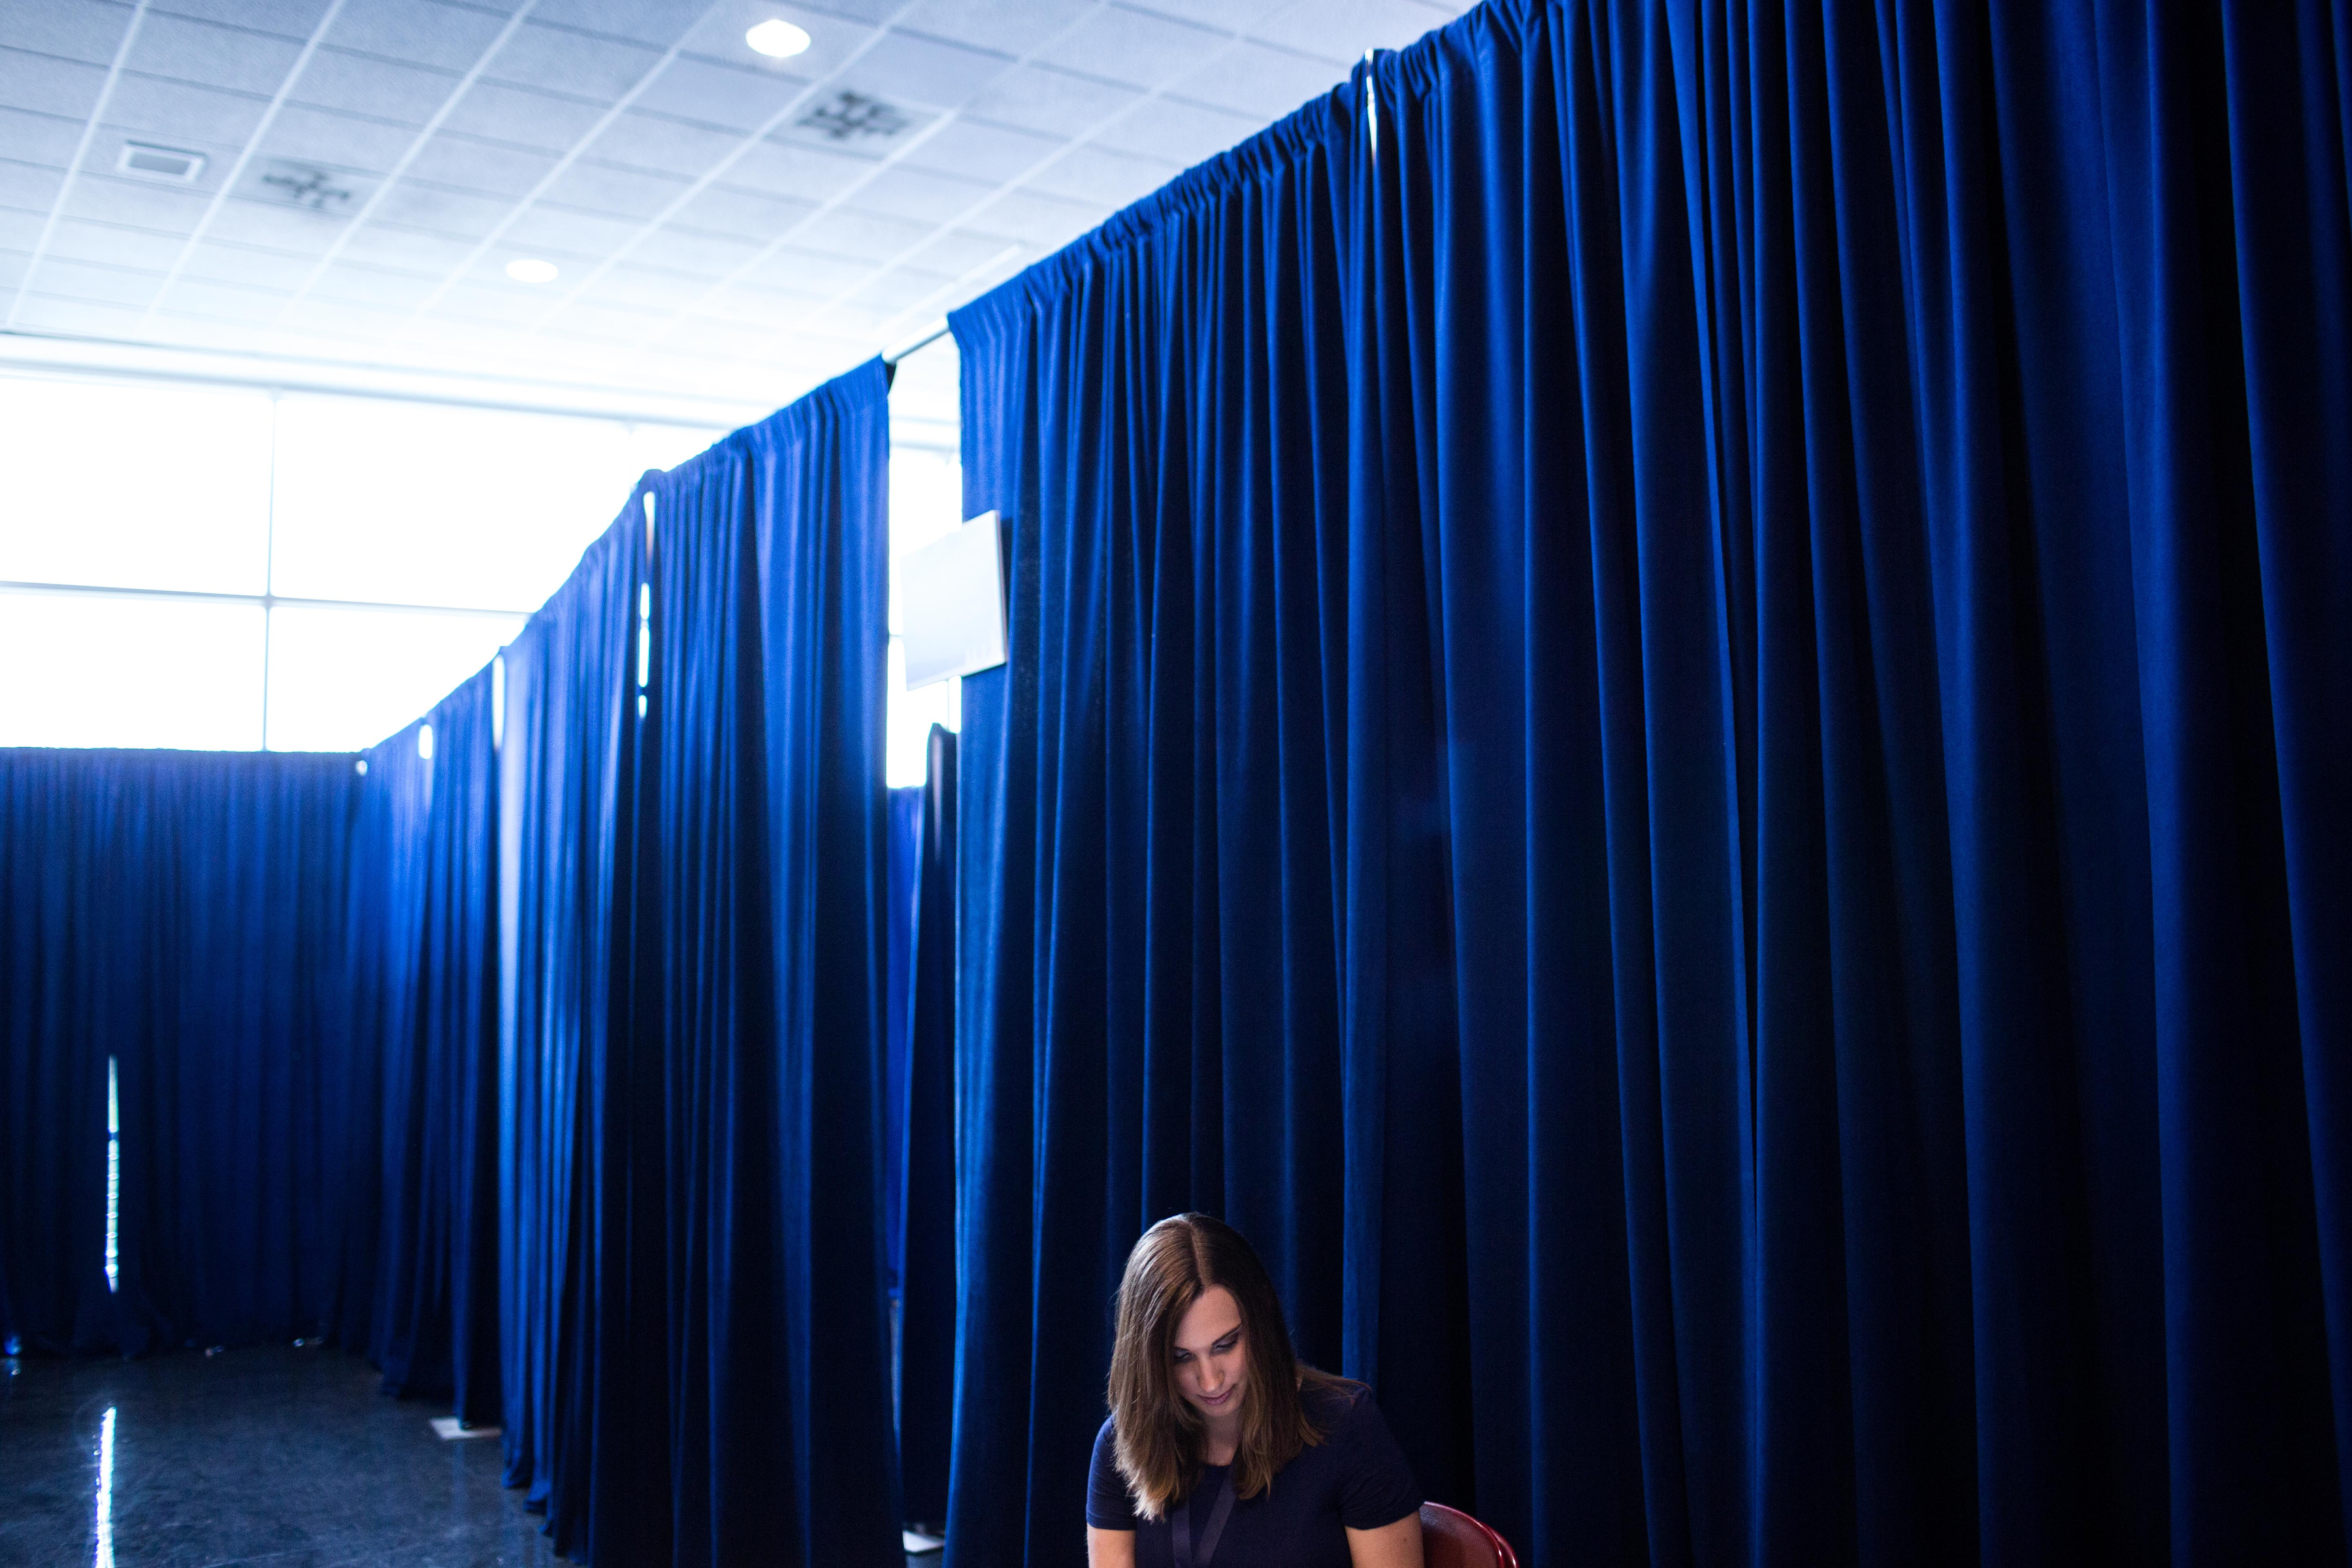 Sarah McBride sets up press meetings on her phone at the Wells Fargo Center where she is attending Democratic National Convention on July 25, 2016 in Philadelphia.(Natalie Keyssar for TIME) (Natalie Keyssar for TIME)